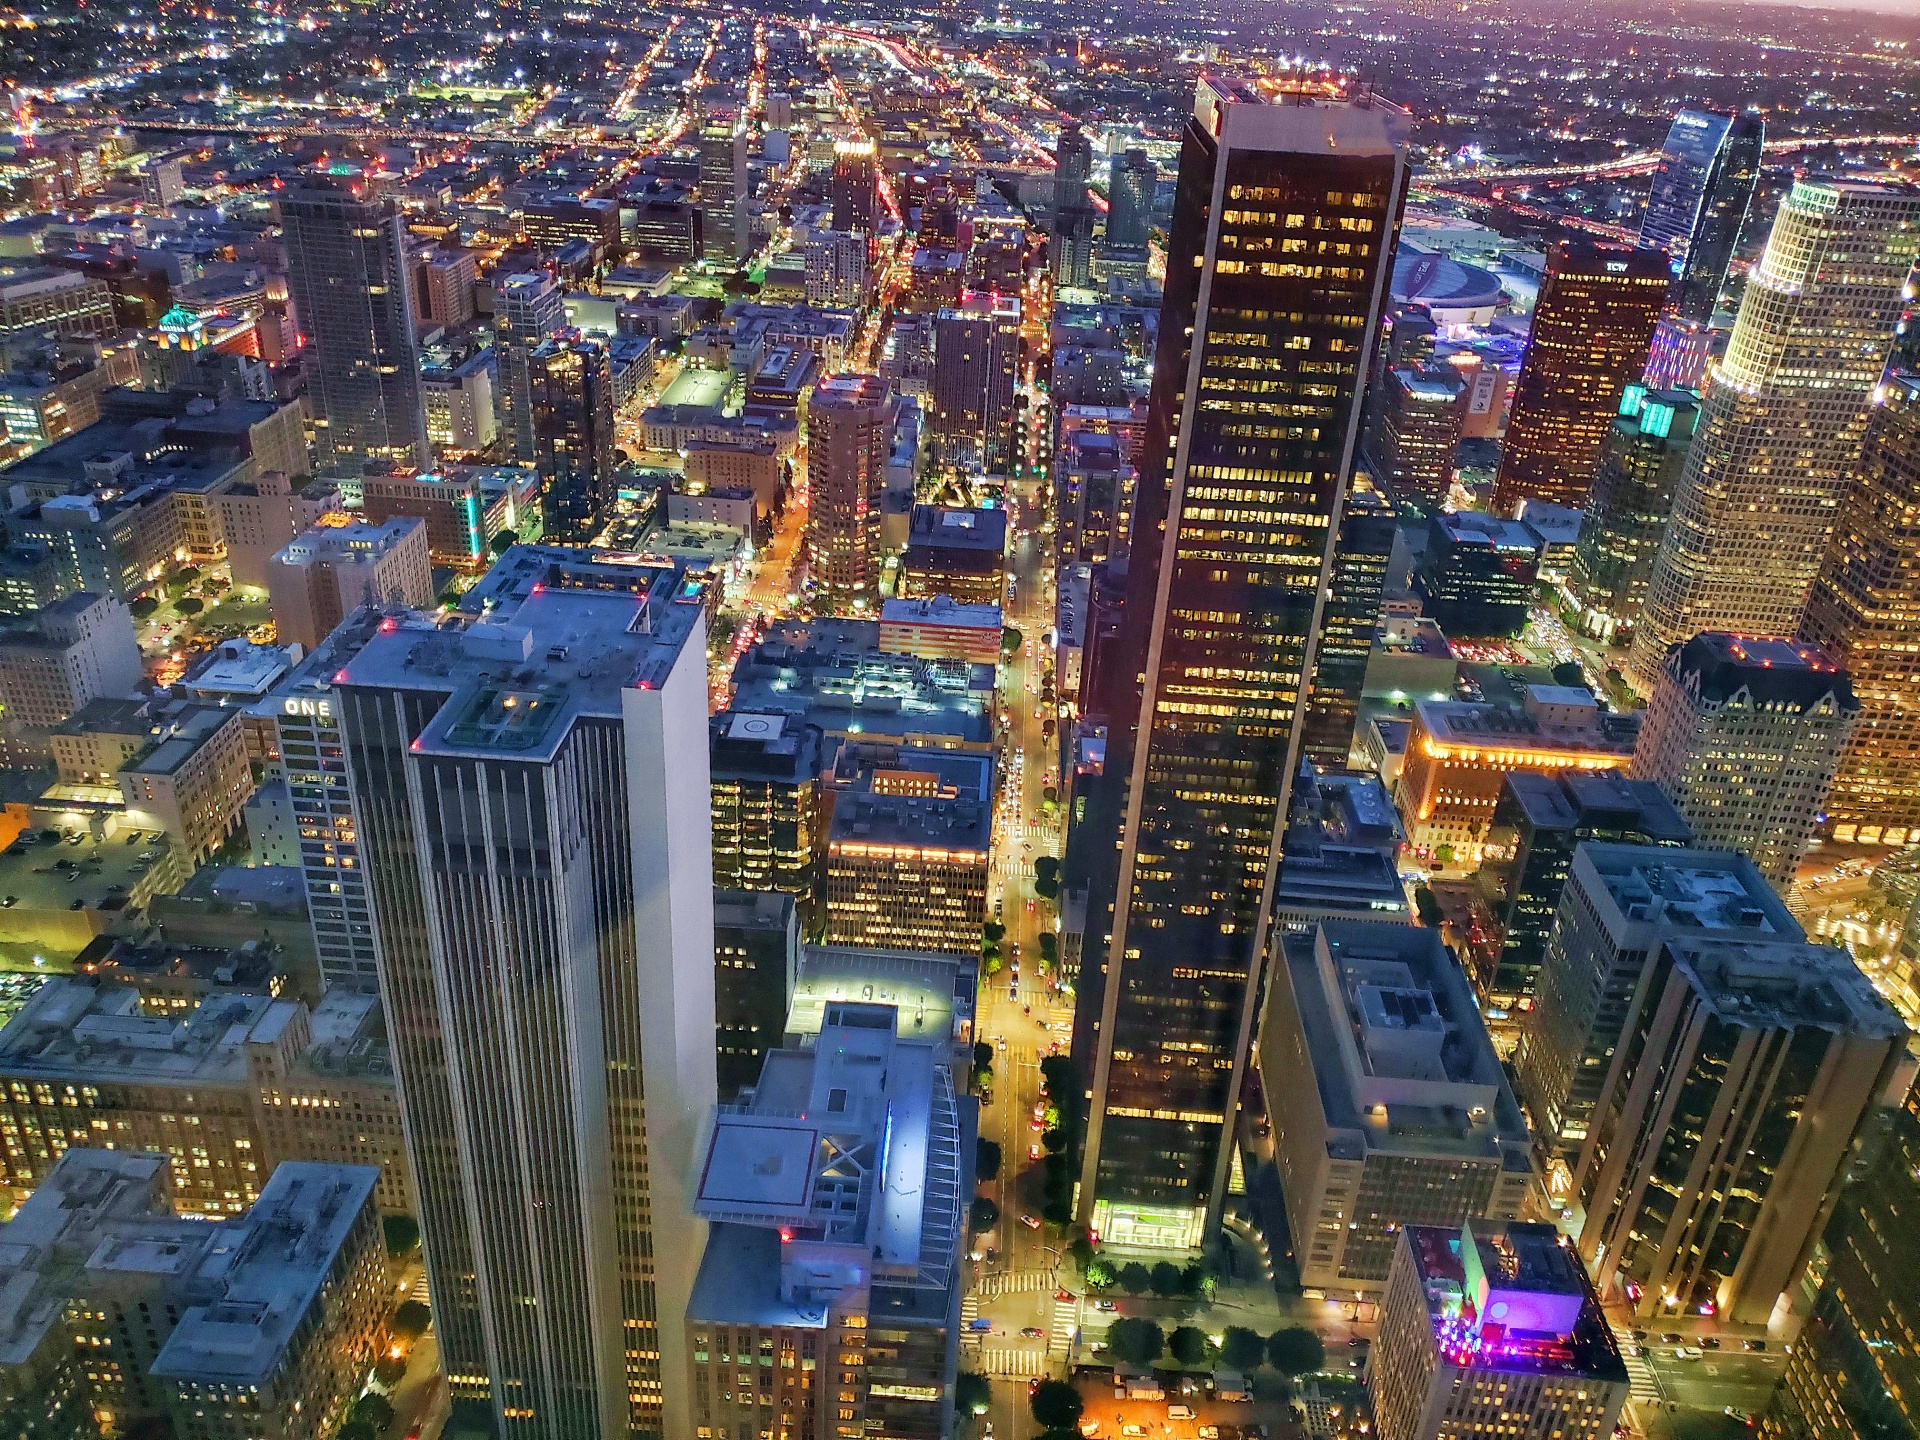 Los Angeles from top of a high rise just after sunset